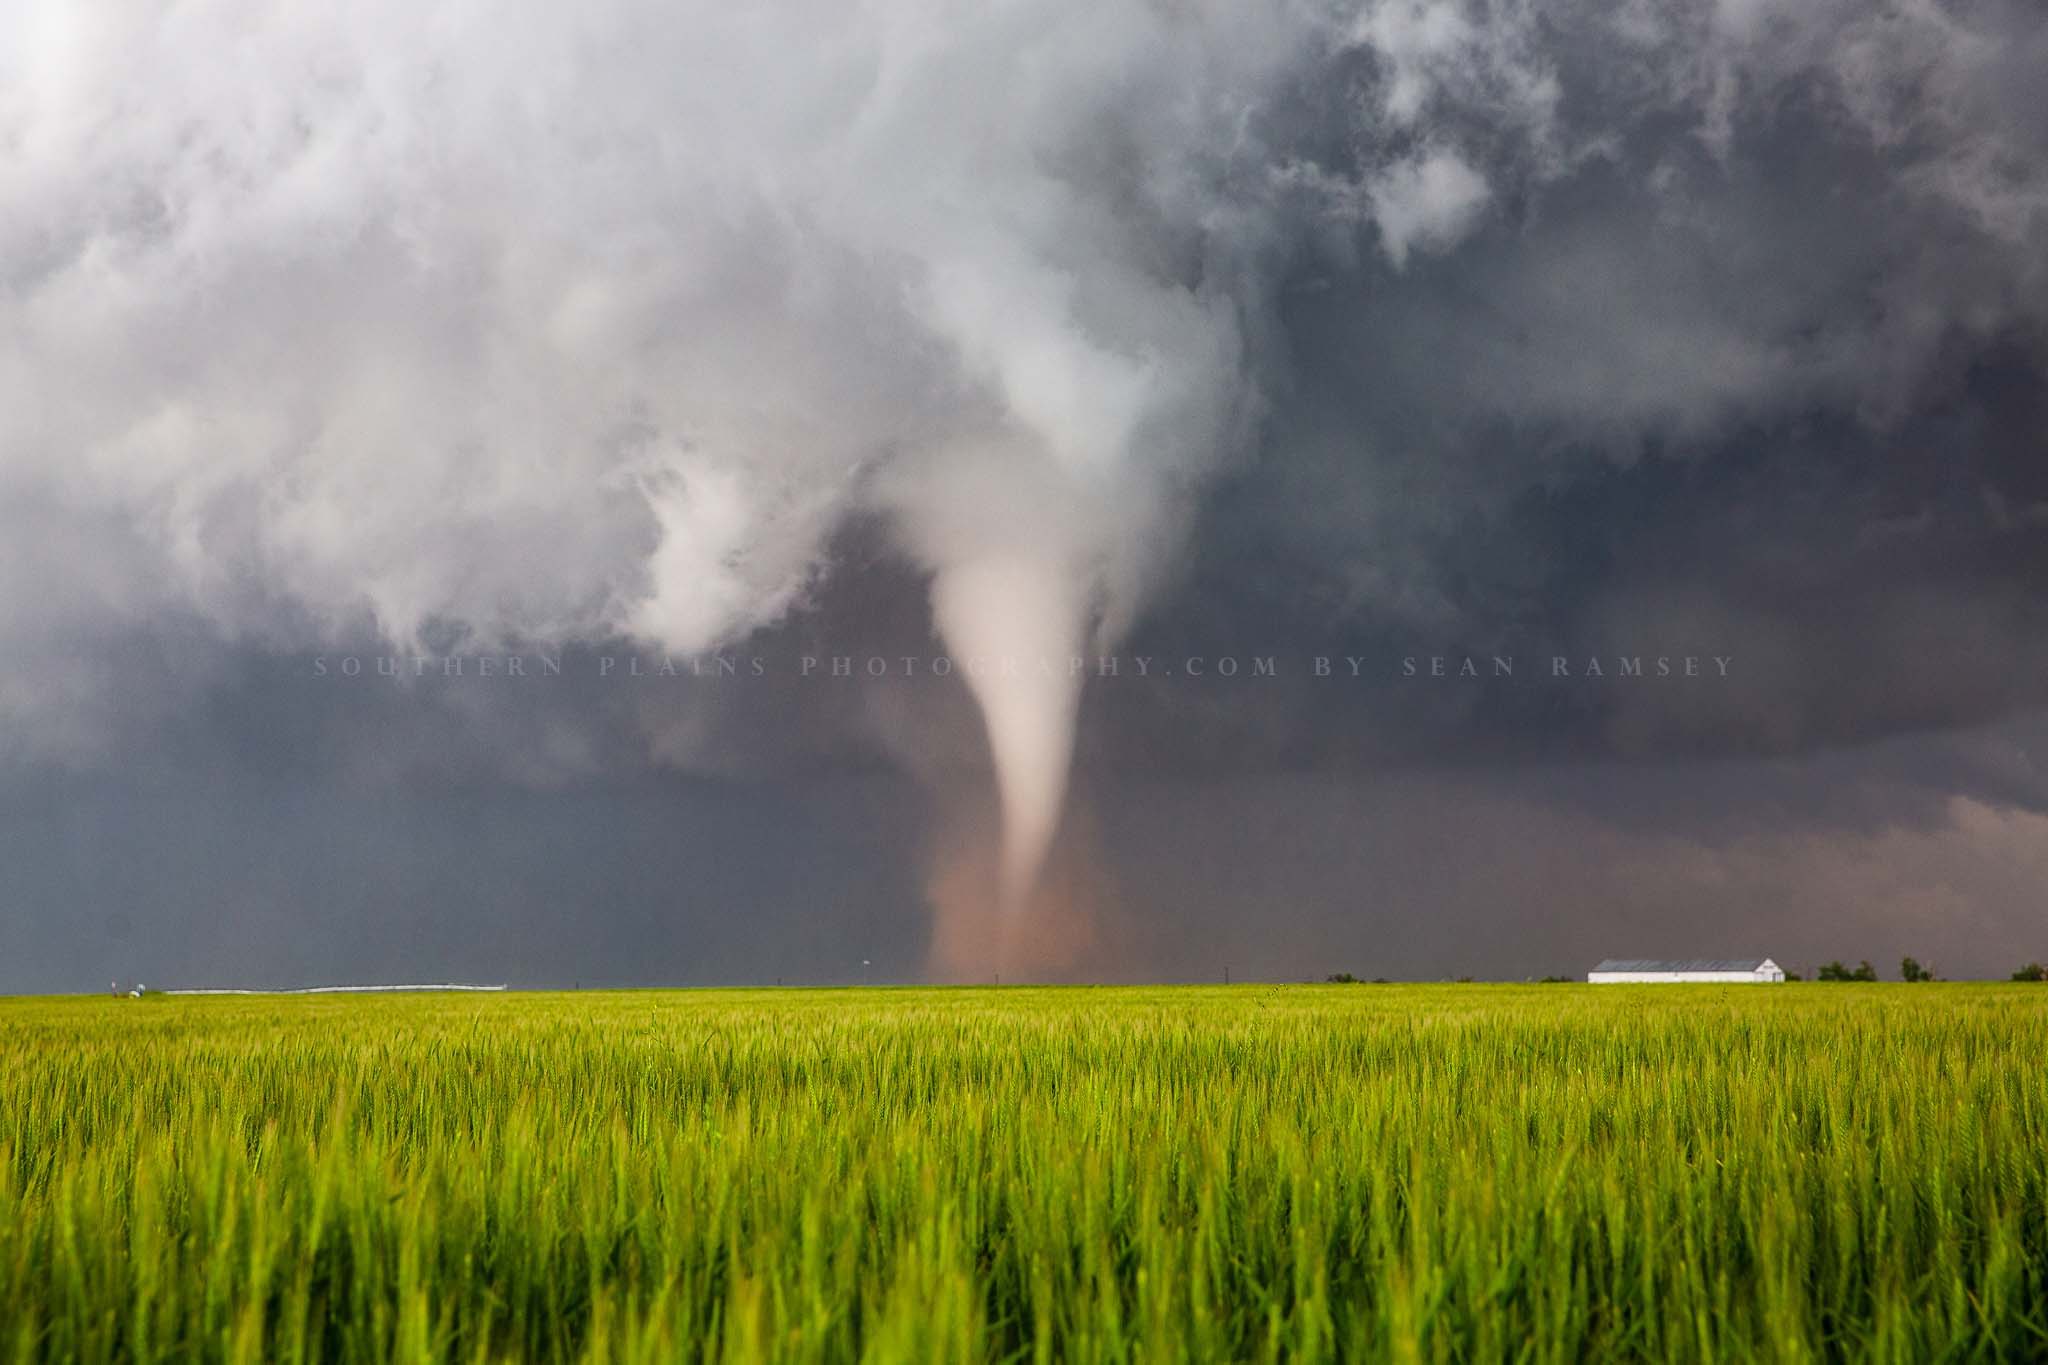 Storm photography print of a white tornado kicking up dust over a wheat field on a spring day in Texas by Sean Ramsey of Southern Plains Photography.